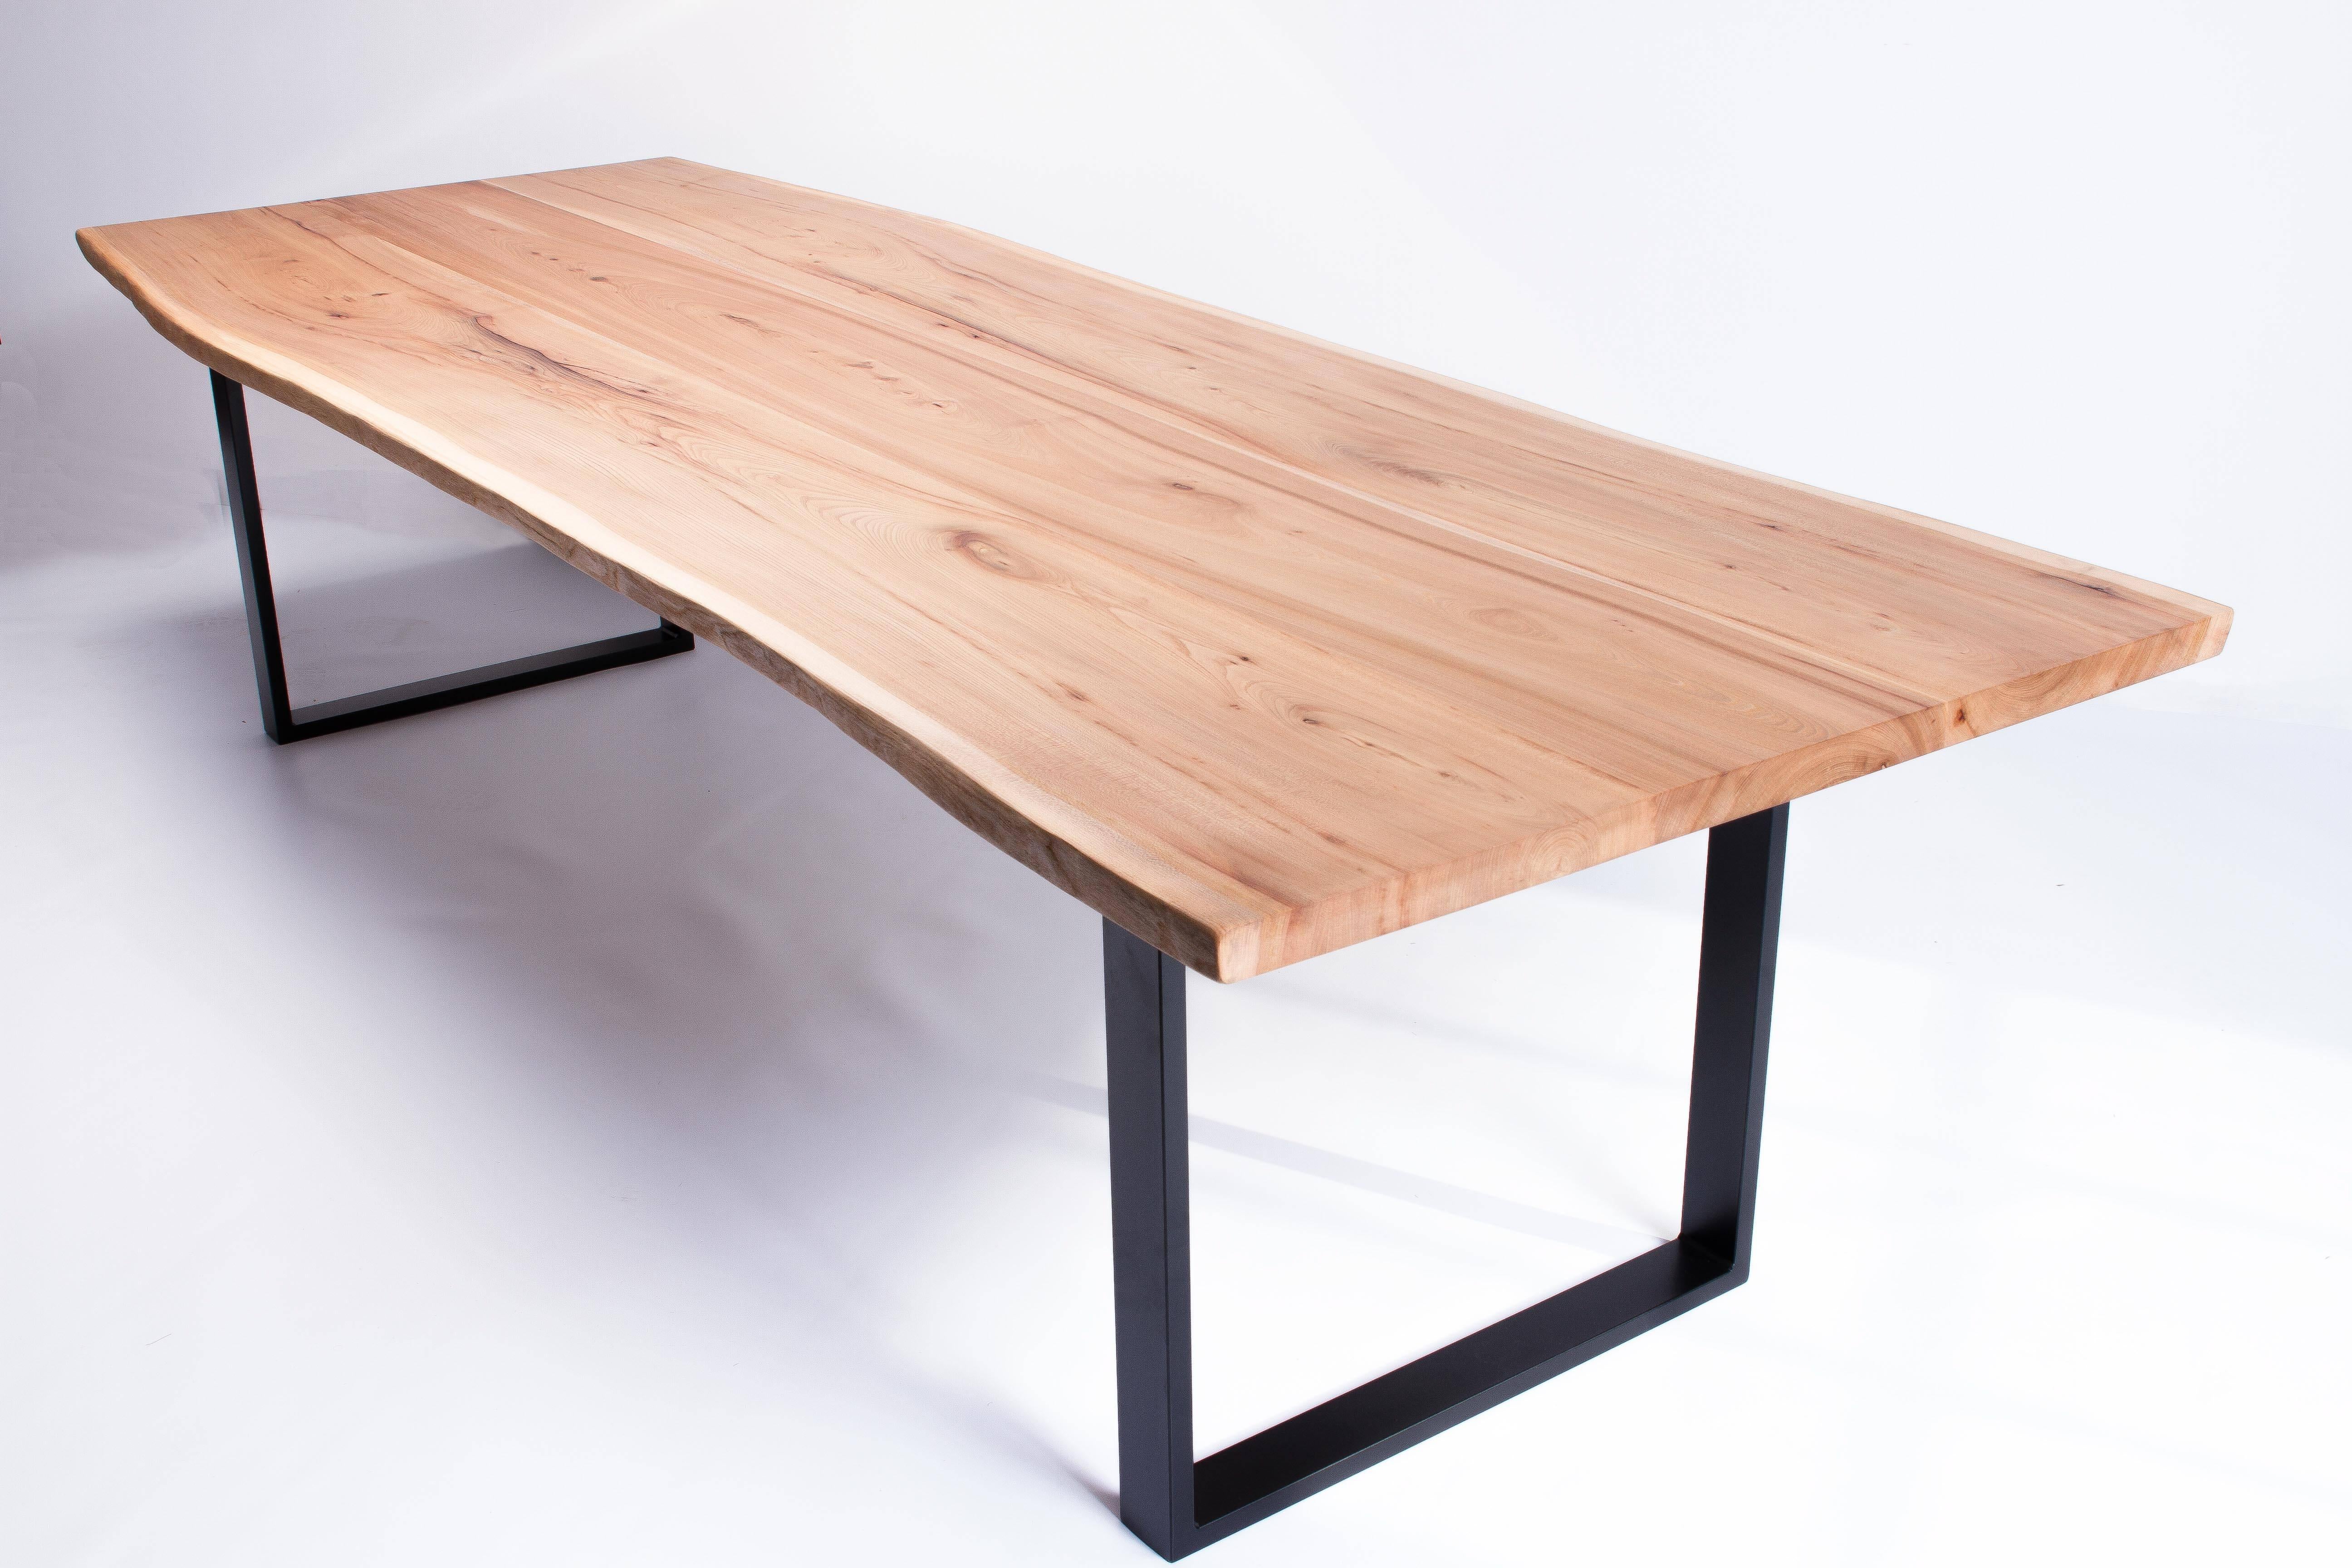 Dining table from sustainably sourced natural live edge slabs of English elm or oak, hand finished in a durable satin finish.
Handcrafted by English Artisan makers, each part is fully customizable.

Sat on hand welded steel box frame legs, shown in